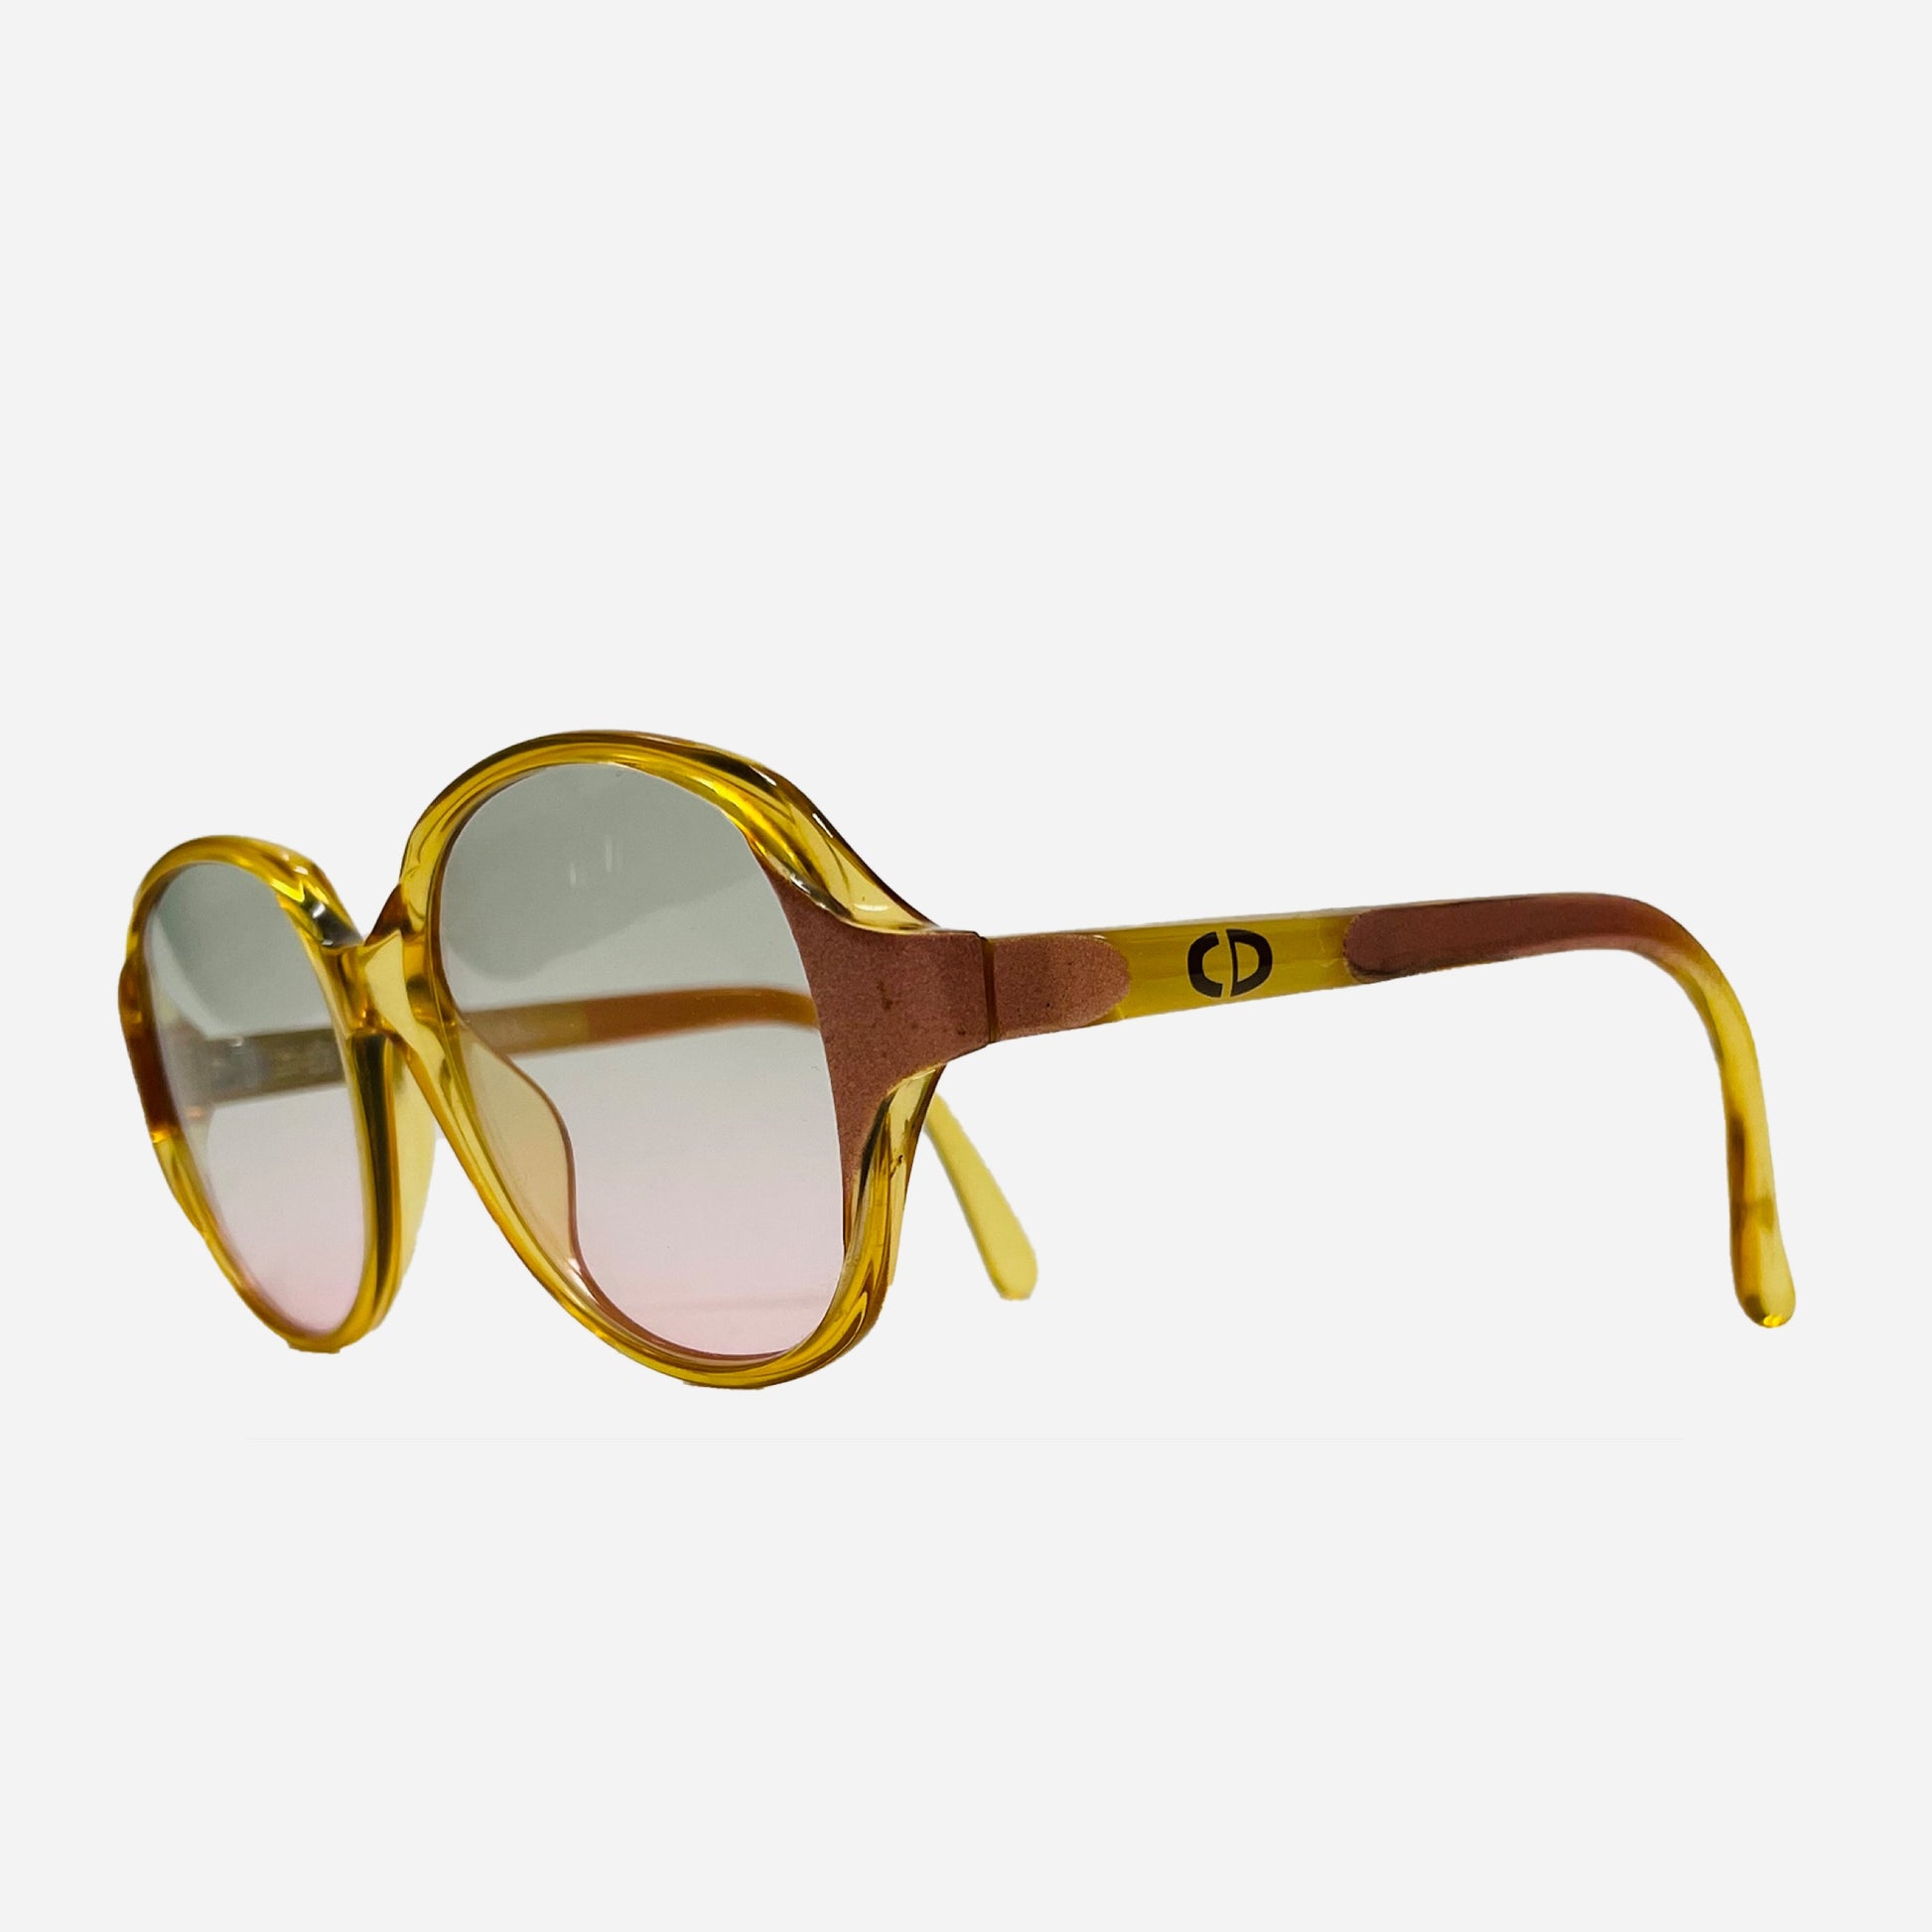 Vintage-Christian-Dior-Sonnenbrille-Sonnenbrille-2596-Optyl-the-seekers-front-side